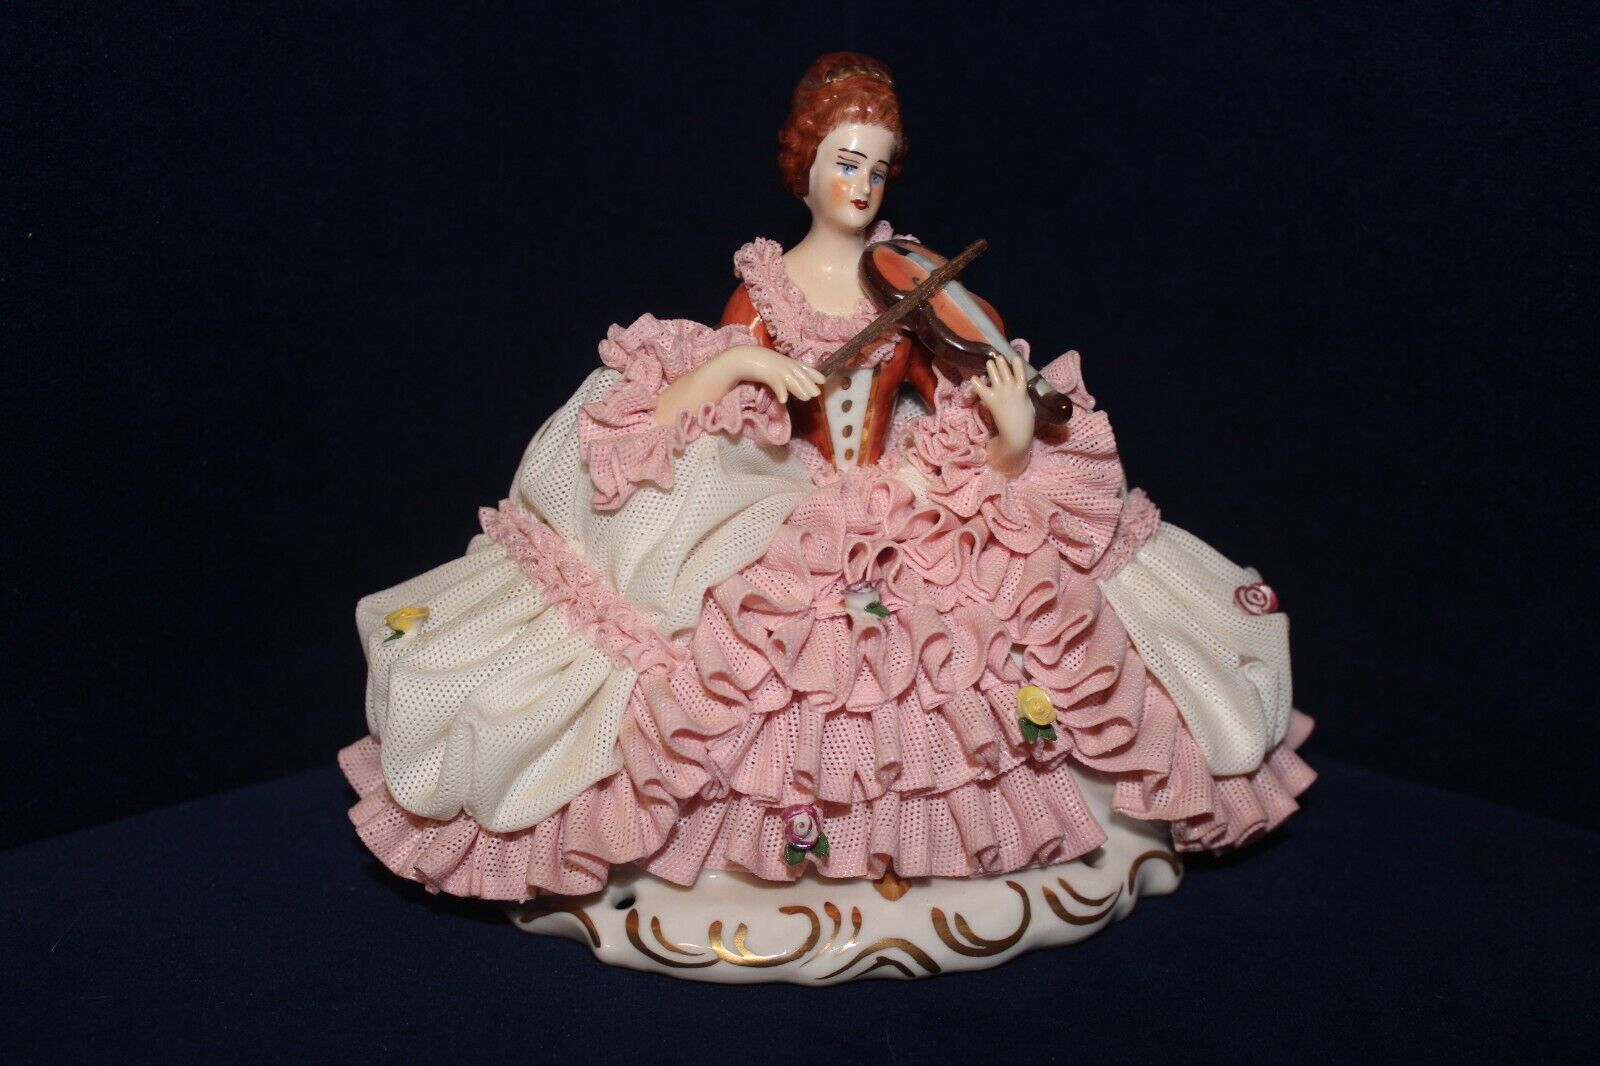 Amazing Dresden Porcelain Figurine, Victorian Lady Playing Violin, Lace, Dbl Mrk